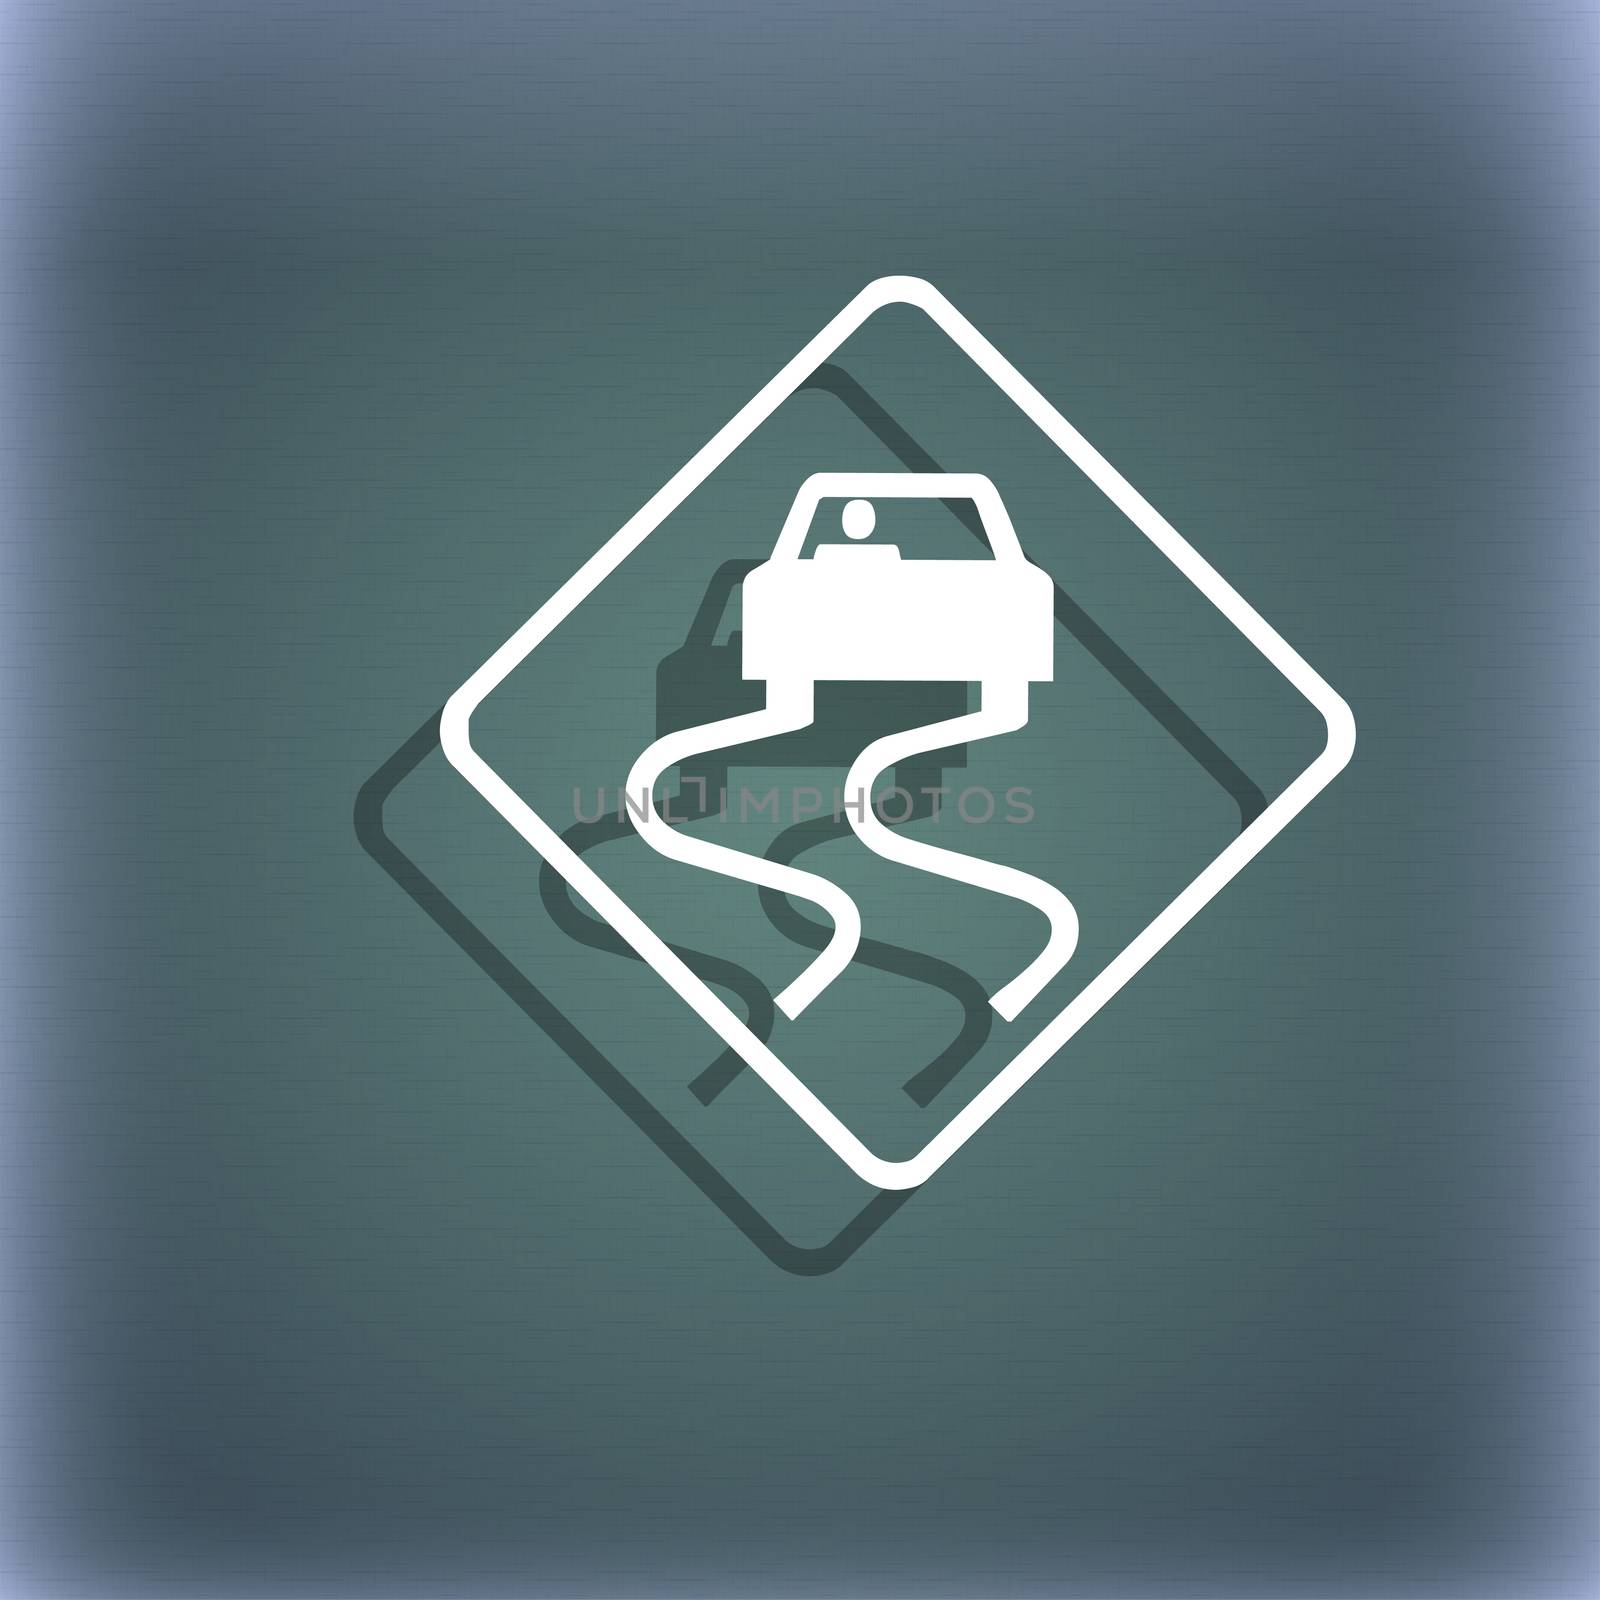 Road slippery icon symbol on the blue-green abstract background with shadow and space for your text. illustration